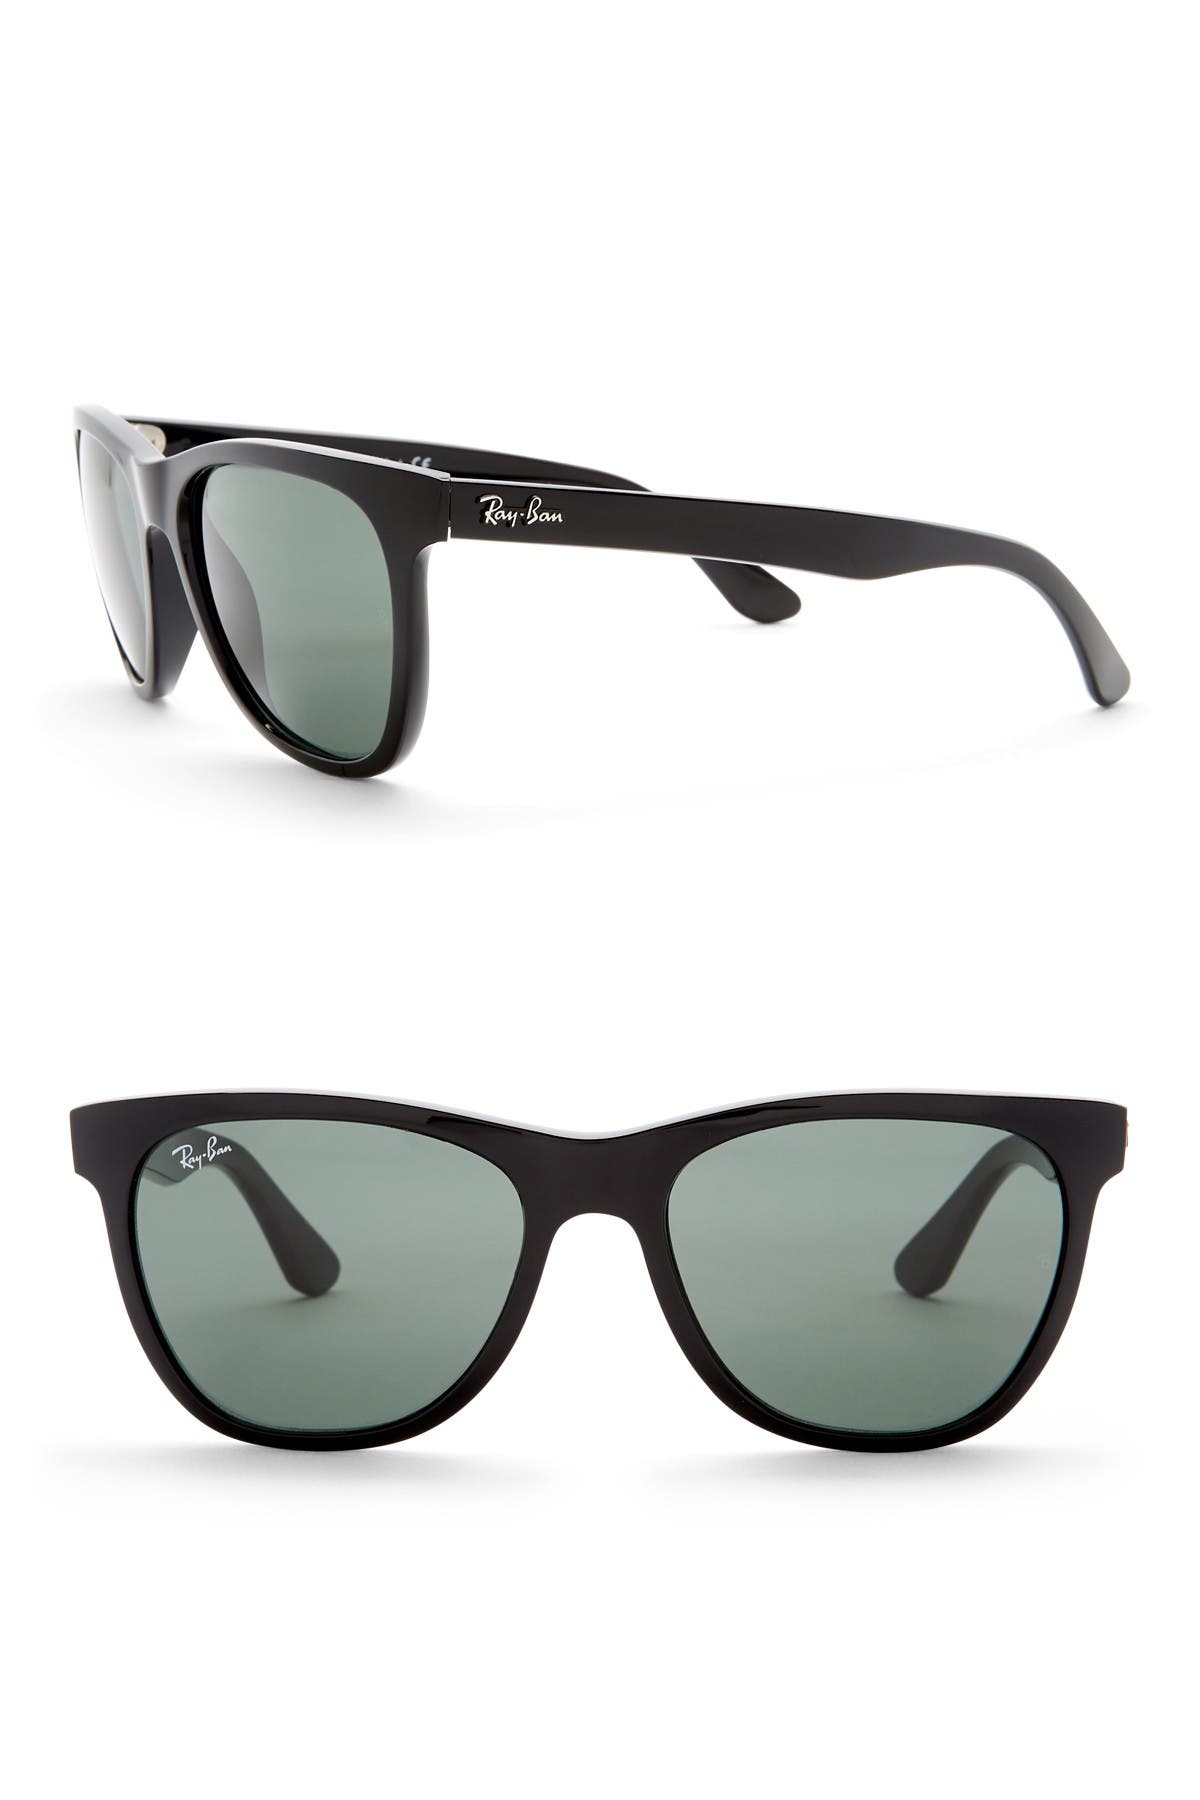 Ray Ban 54mm Off 71 Welcome To Buy